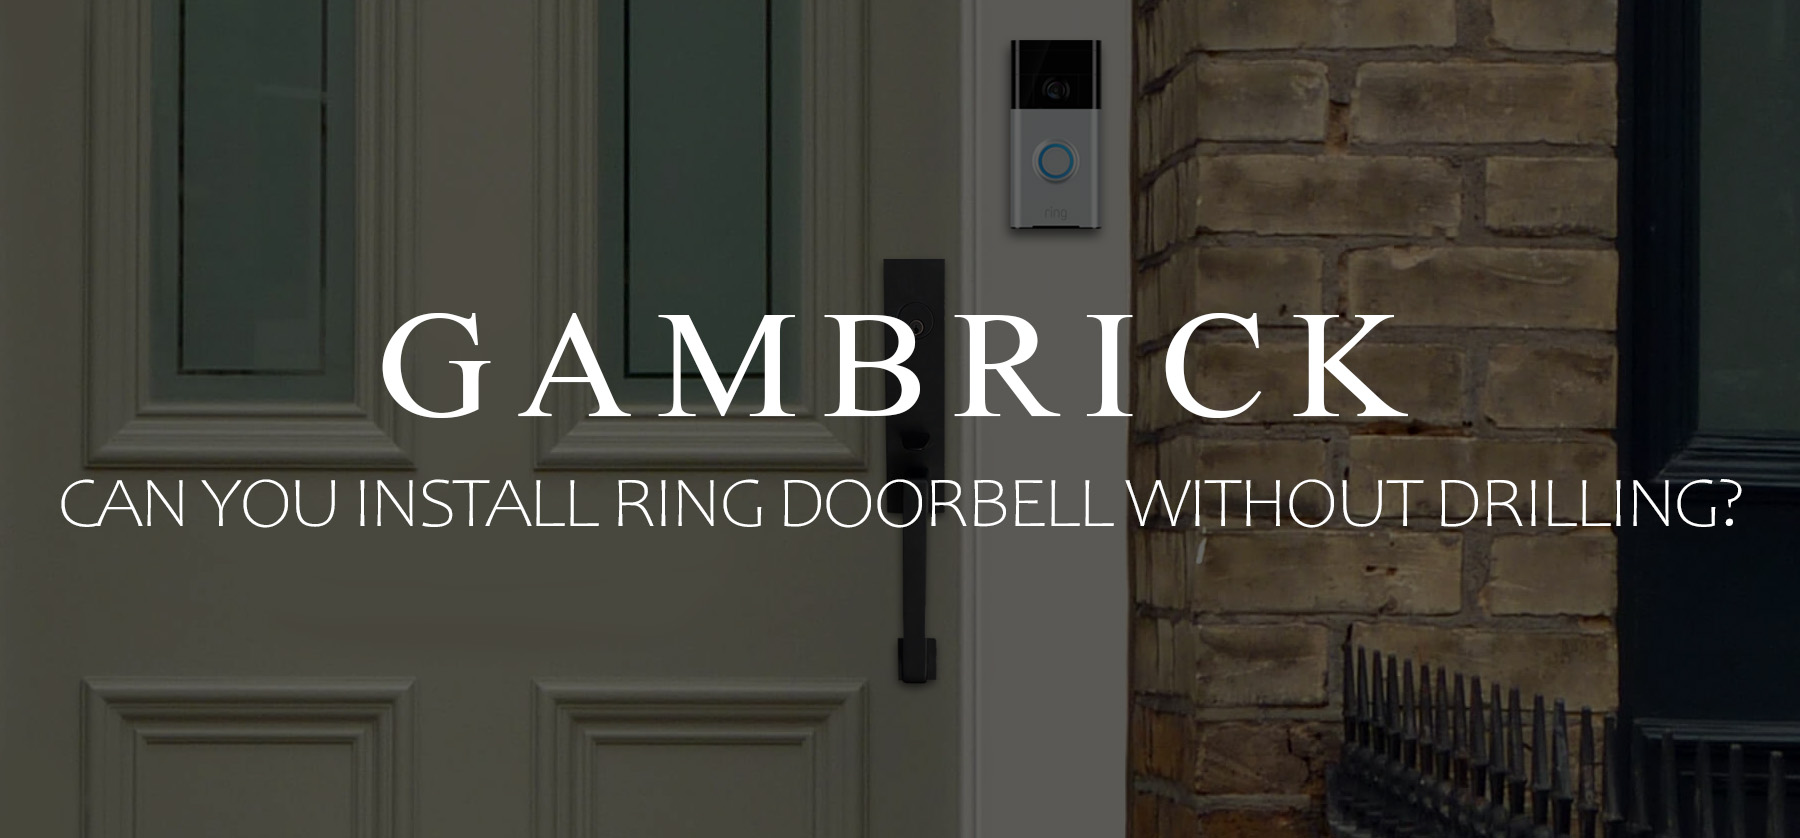 can you install ring doorbell without drilling banner